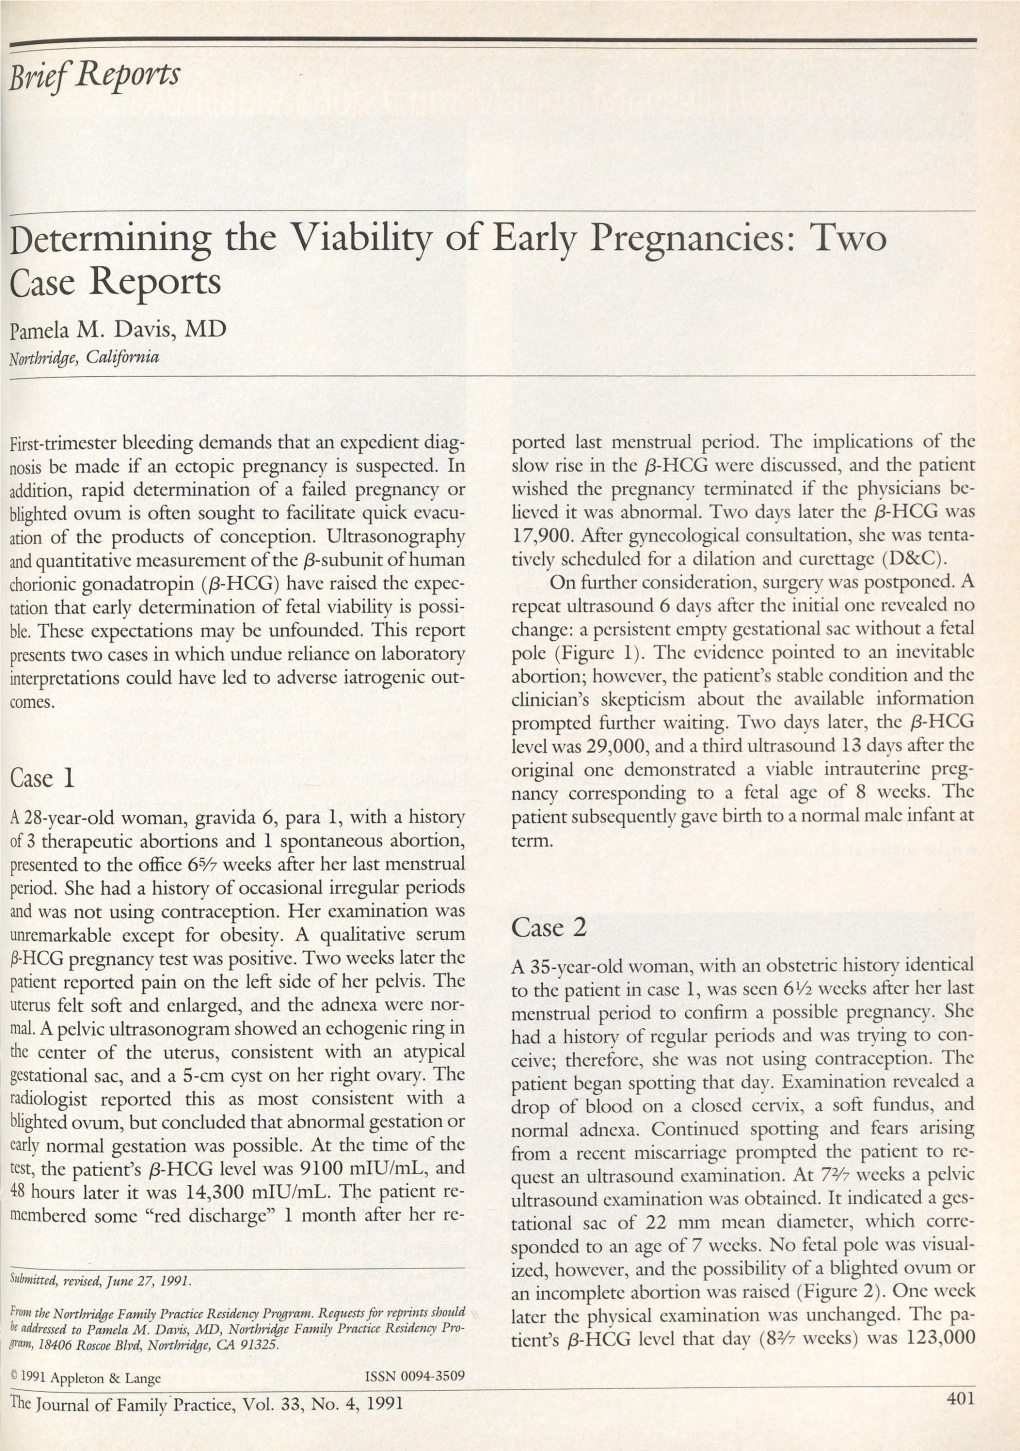 Determining the Viability of Early Pregnancies: Two Case Reports